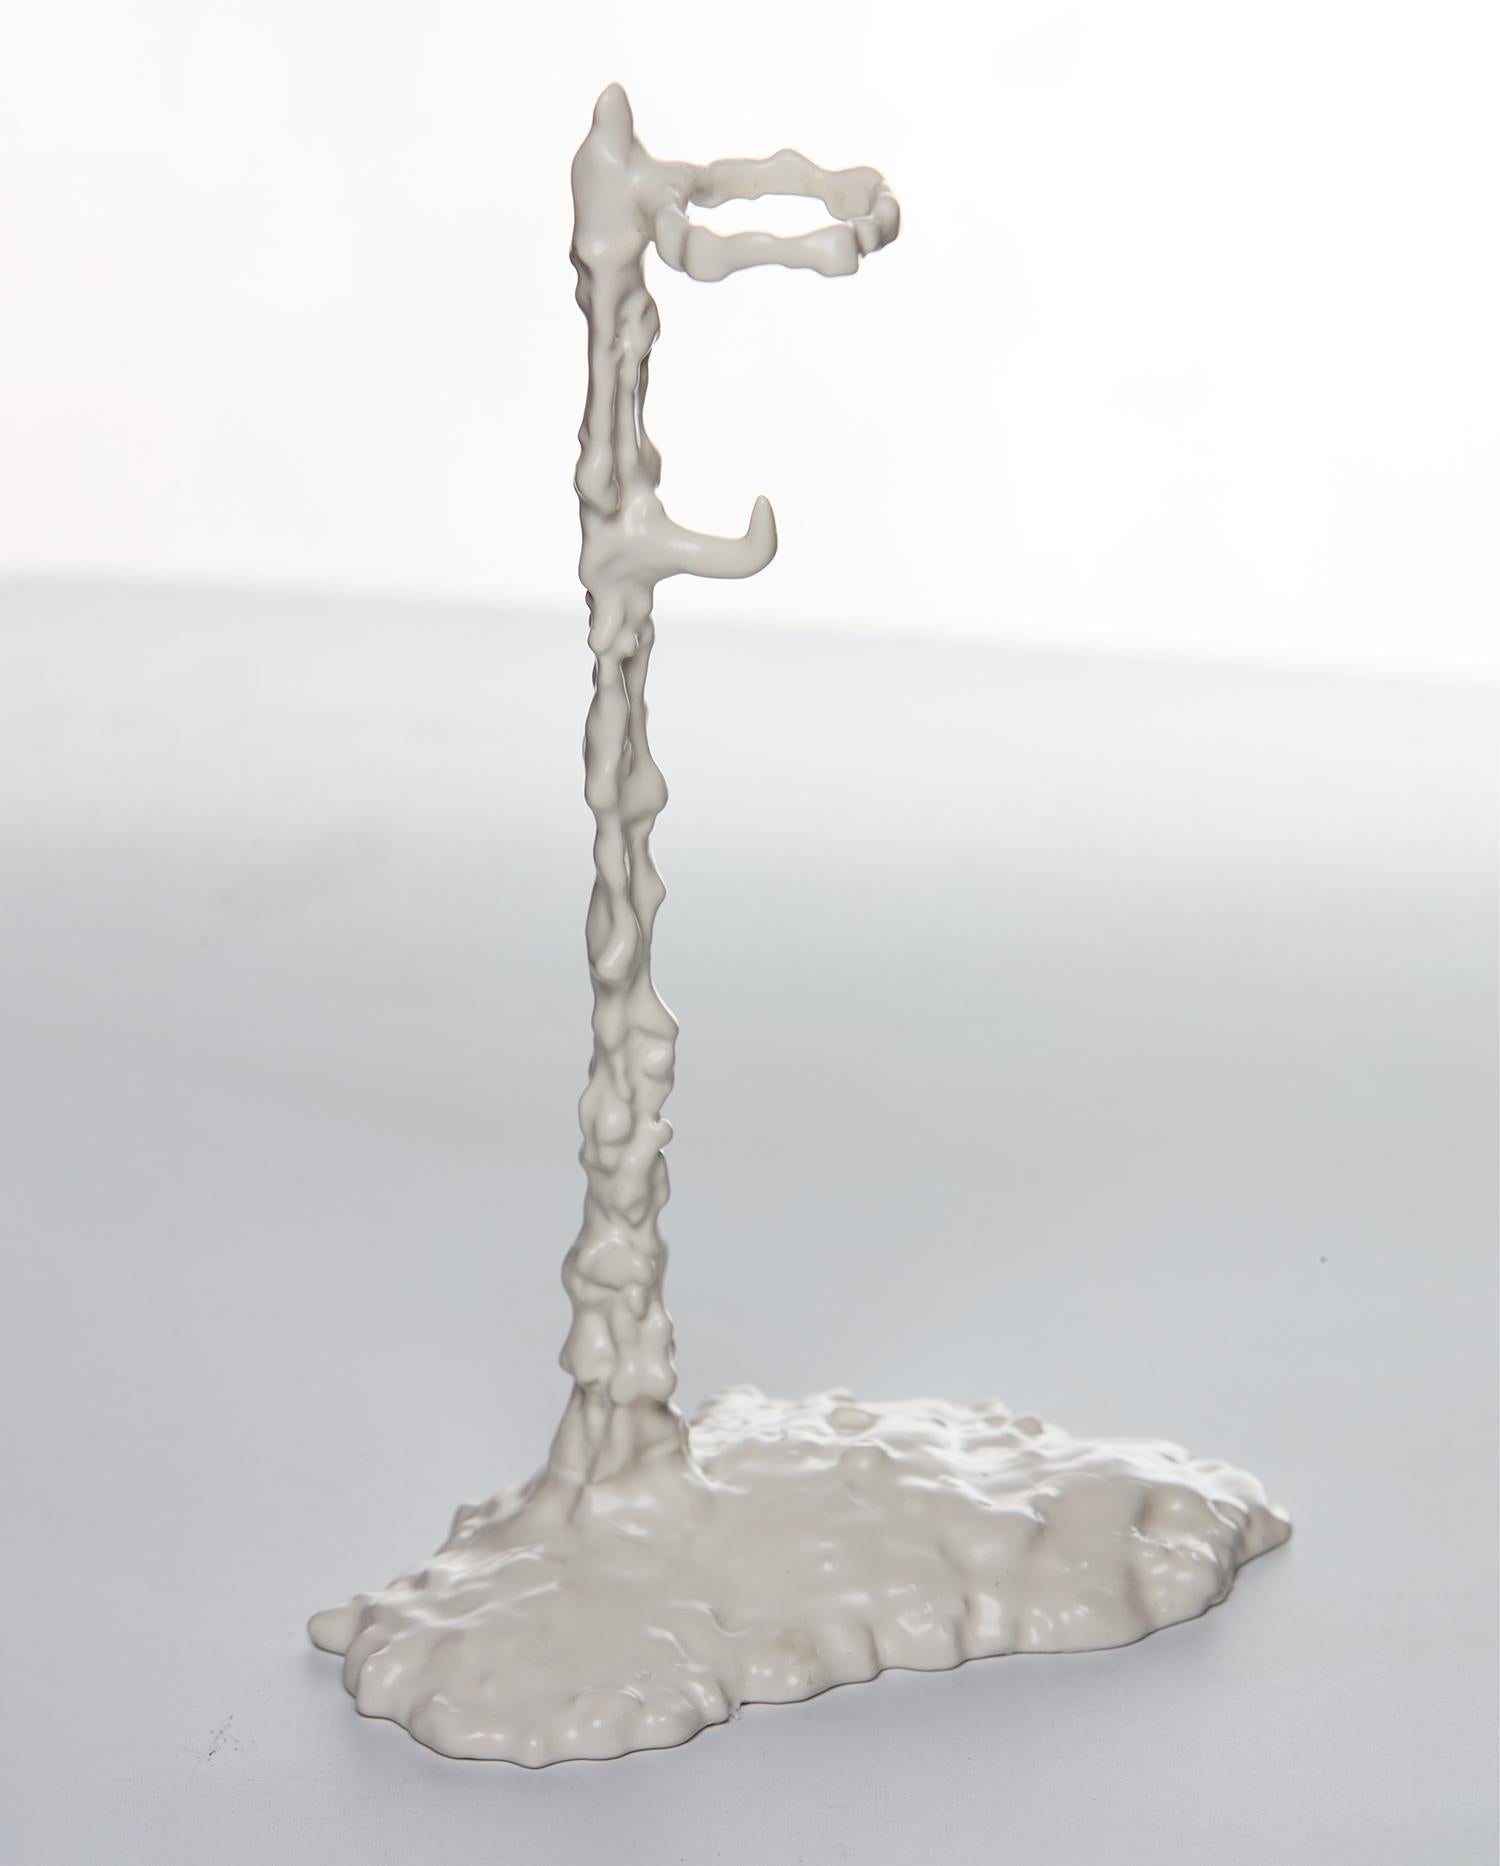 Alberto High Candleholder by Oscar Tusquets
Dimensions: D 8 x W 12 x H 28 cm.
Materials: Cast iron painted in matte white.

Available in two different sizes: low (D 6 x W 10 x H 20 cm) and high (D 8 x W 12 x H 28 cm). Please contact us.

In a